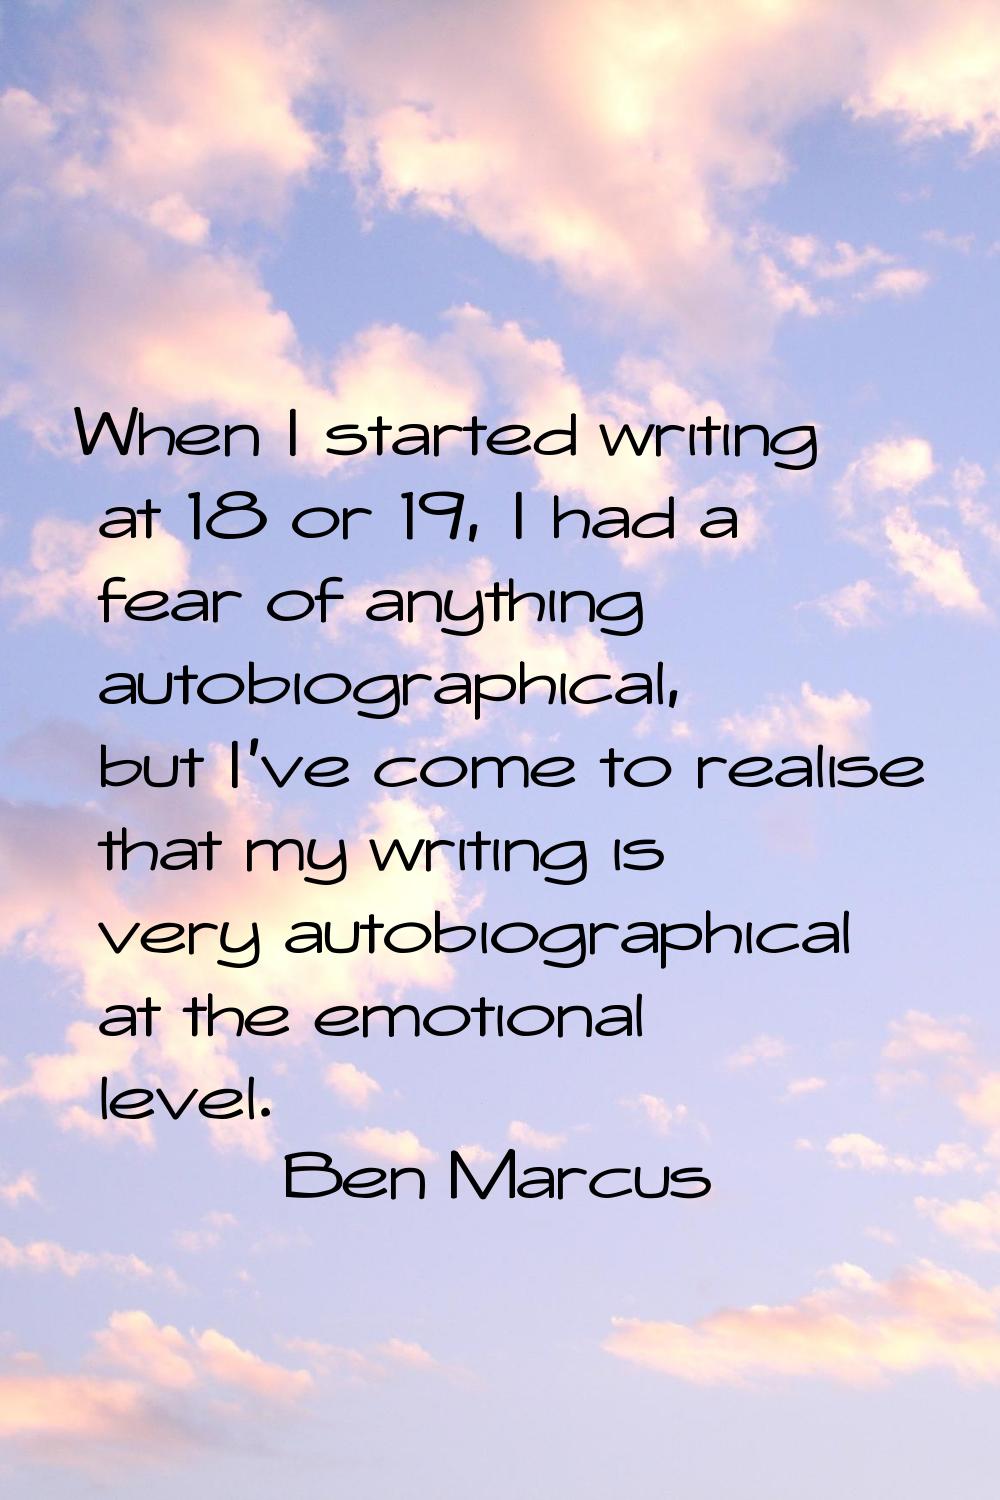 When I started writing at 18 or 19, I had a fear of anything autobiographical, but I've come to rea